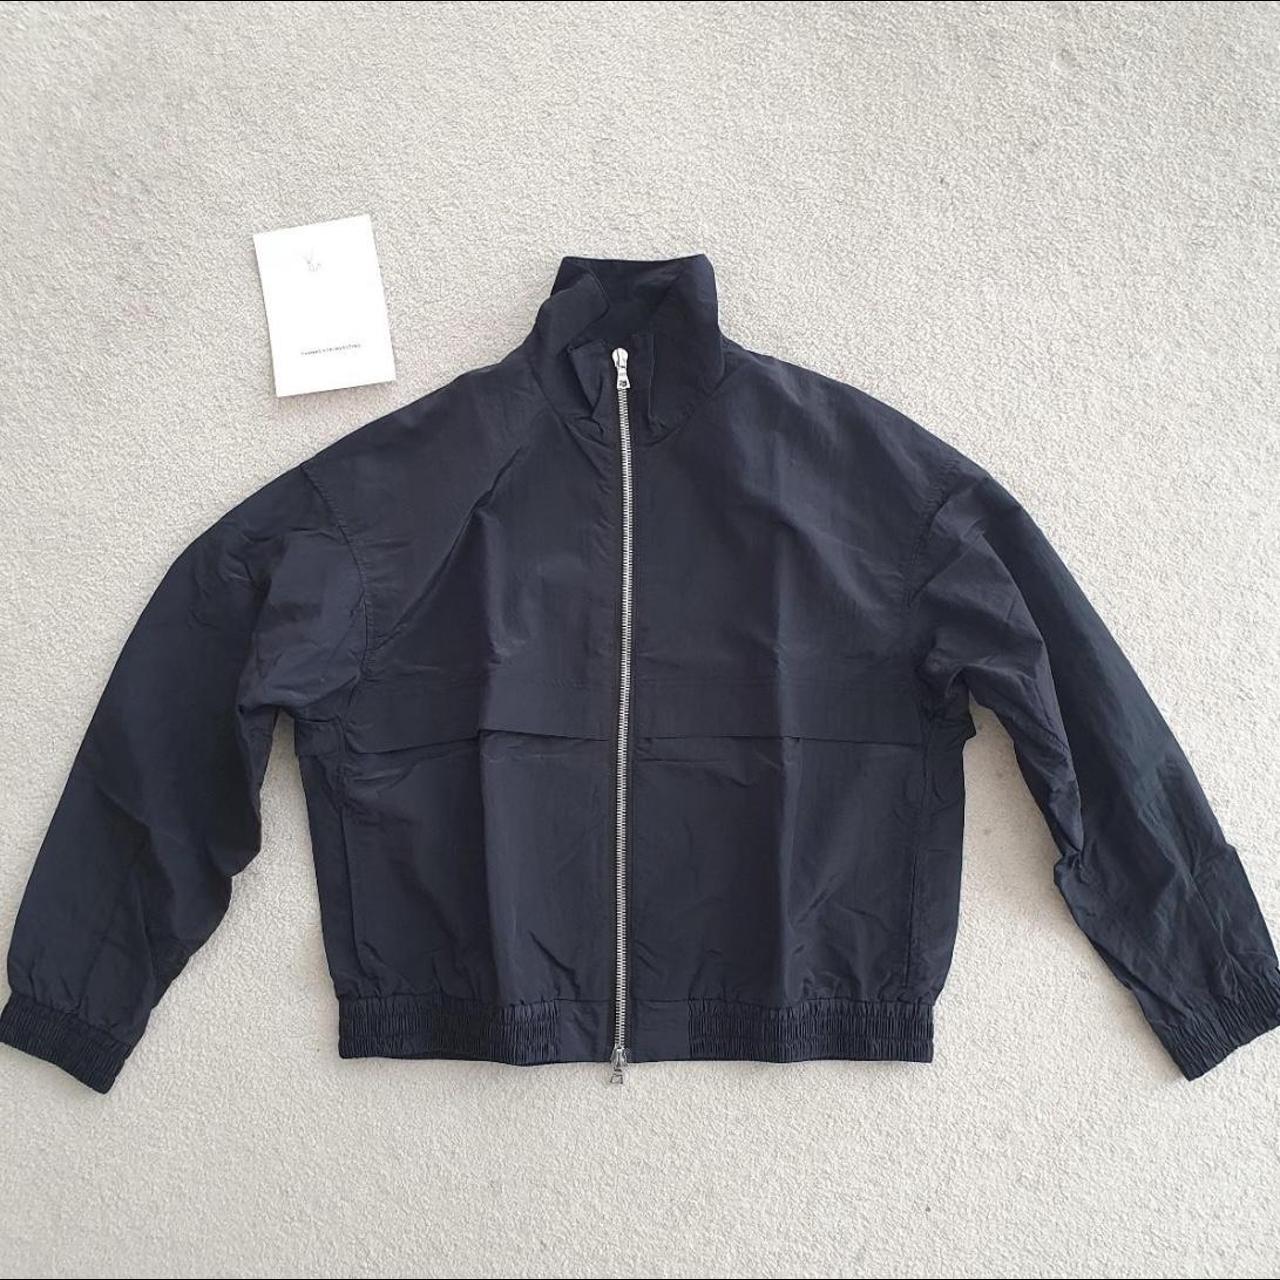 Massive want to buy! Cole buxton track jacket in... - Depop